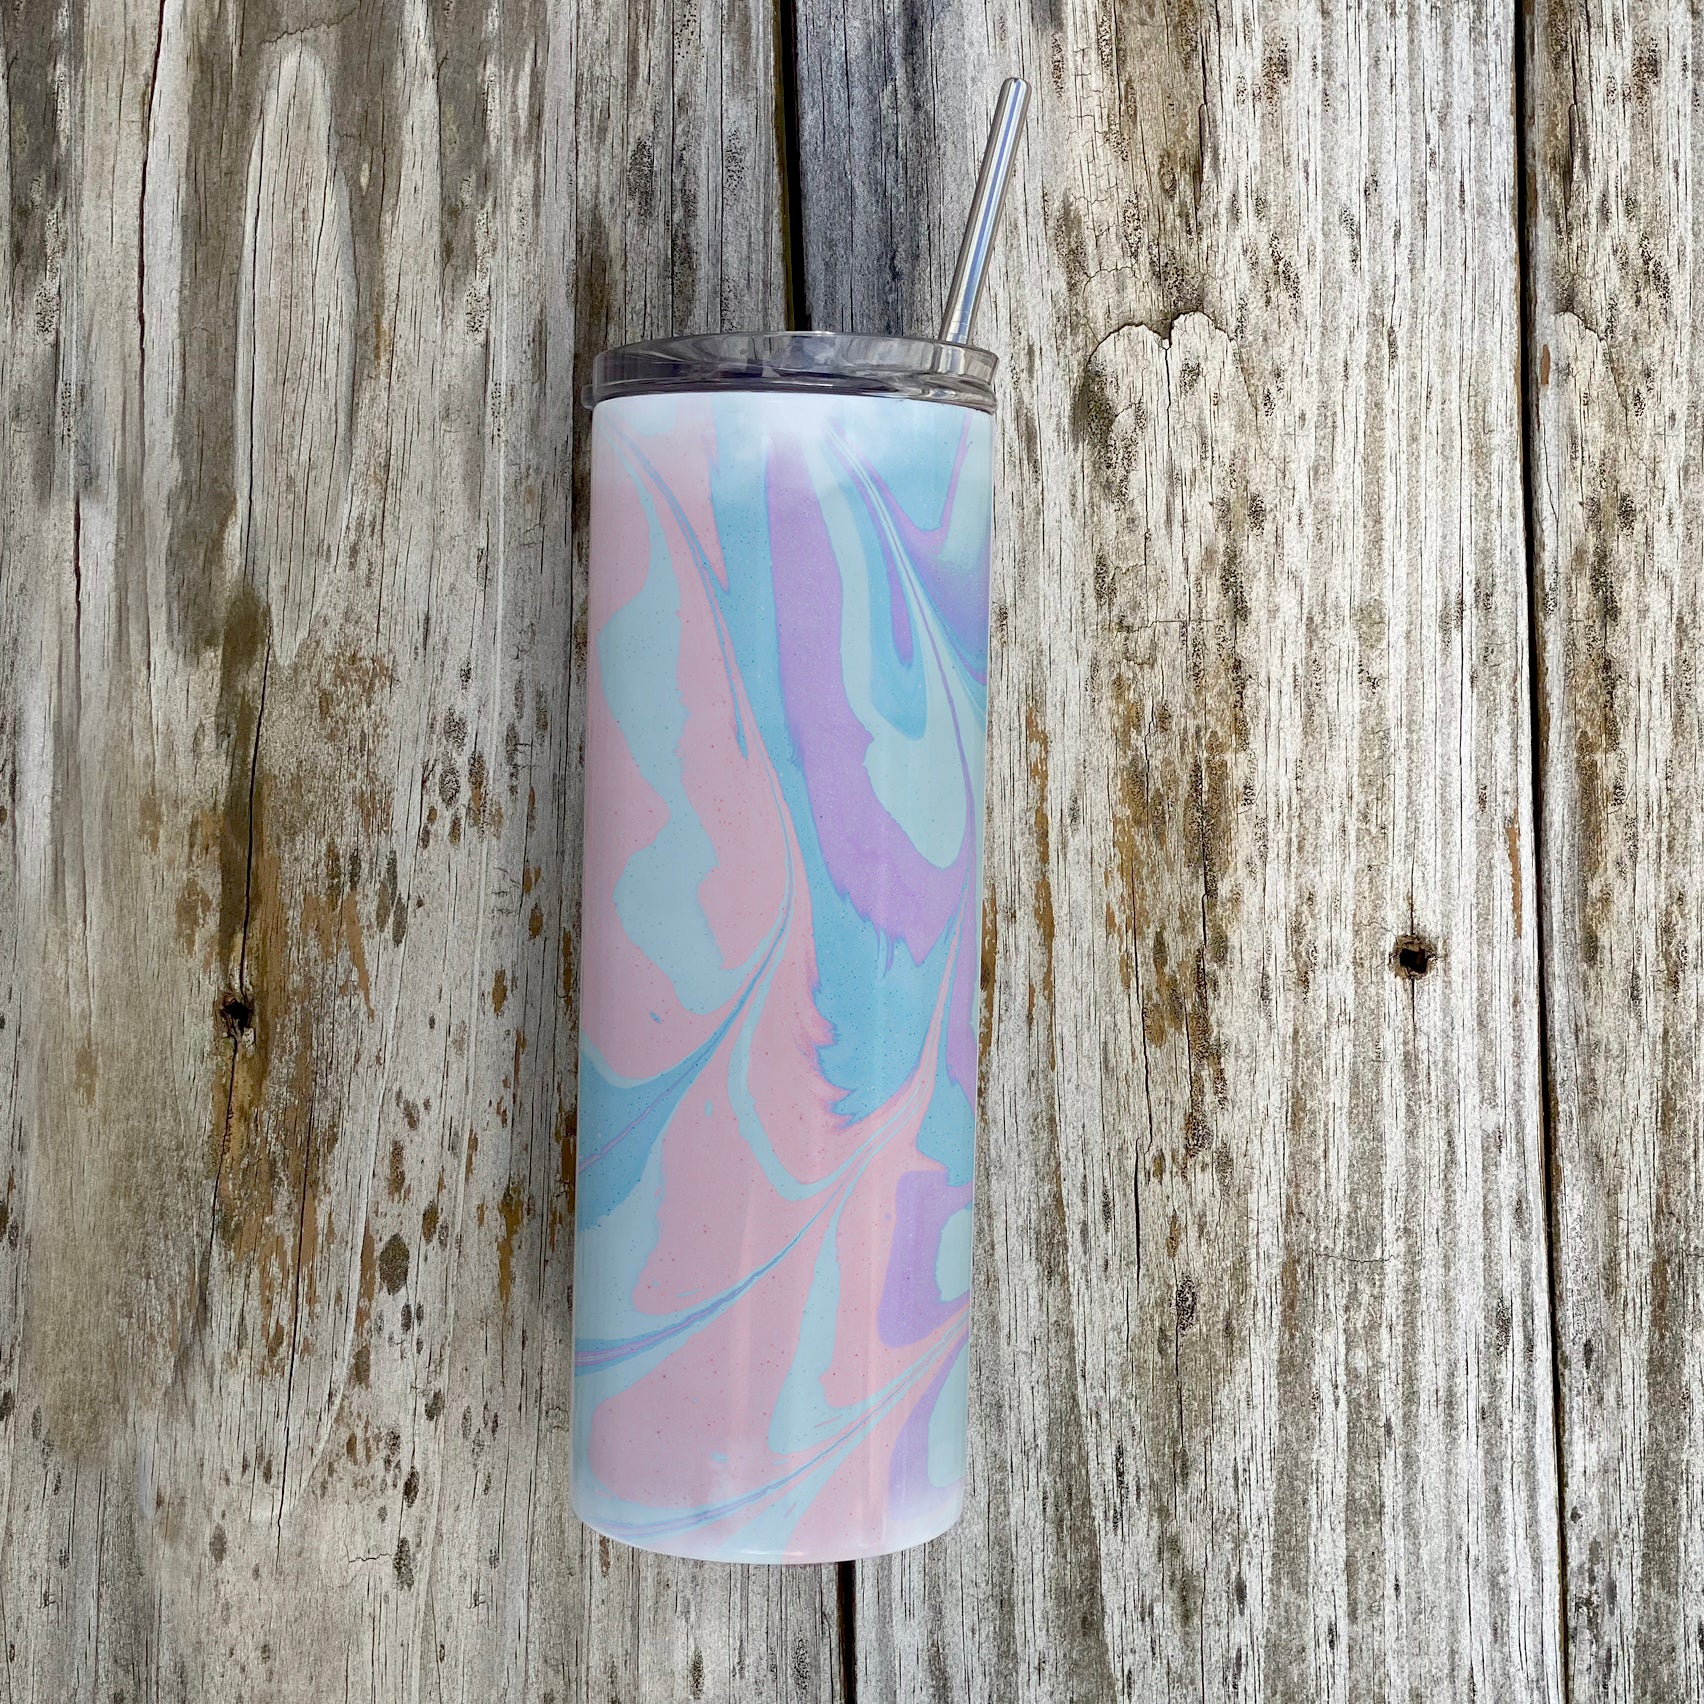 Trend Setters Original (Pastel Marble) 20oz Stainless Steel Travel Tumbler with Straw